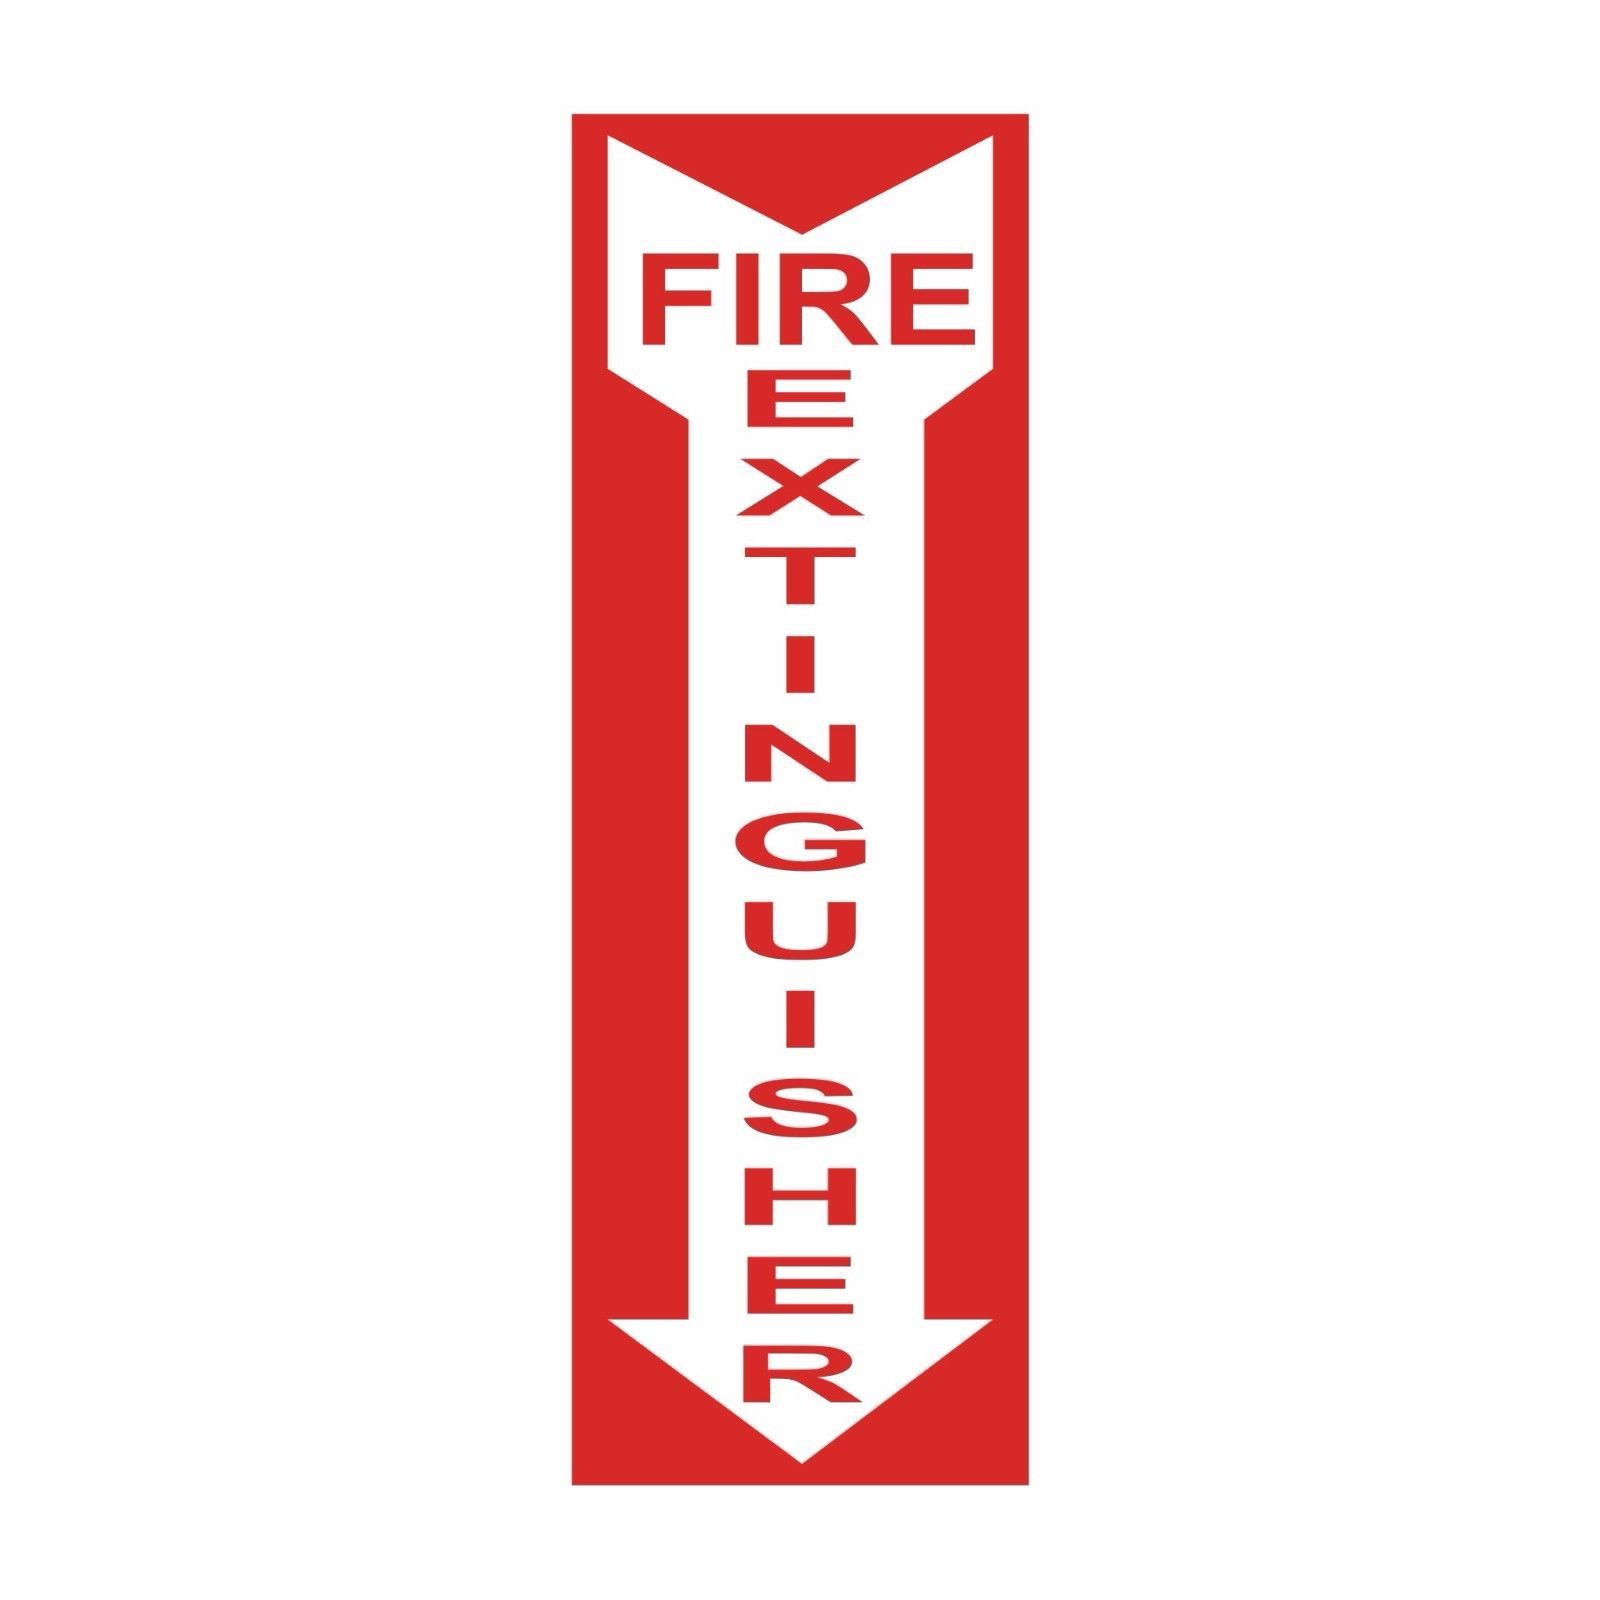 Fire Extinguisher Stickers And Decals